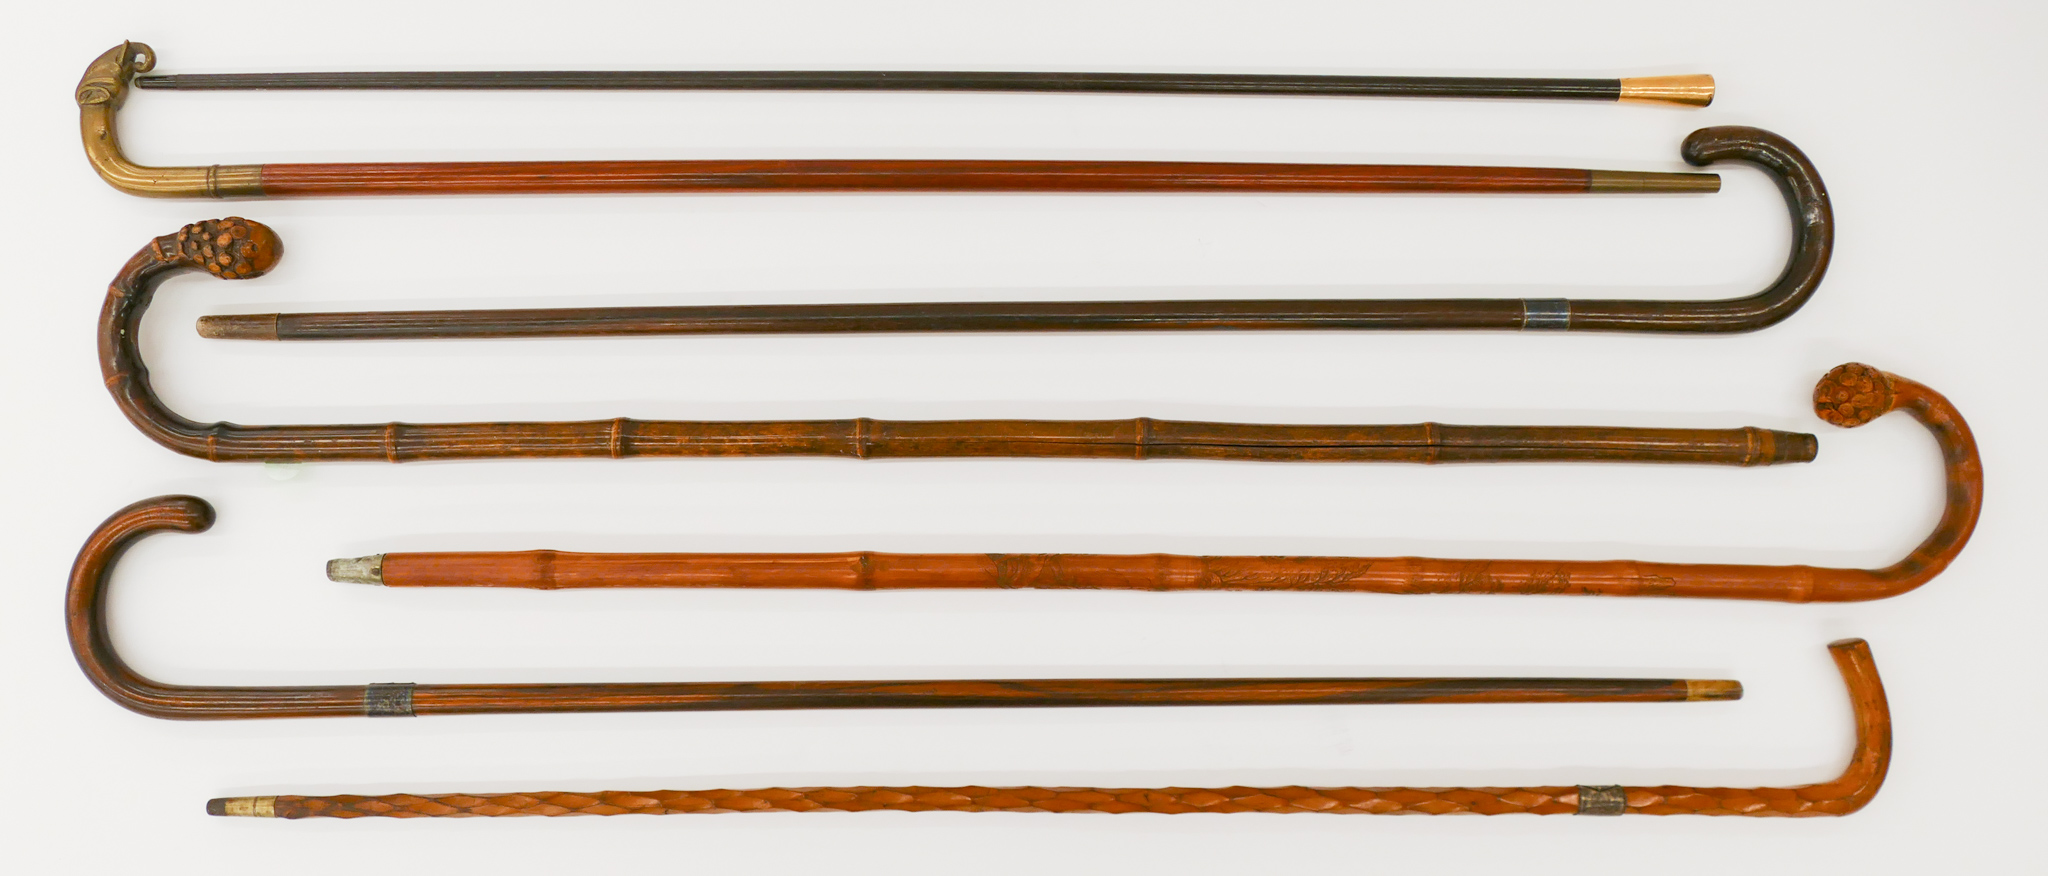 7pc Antique Wood Canes and Walking Sticks